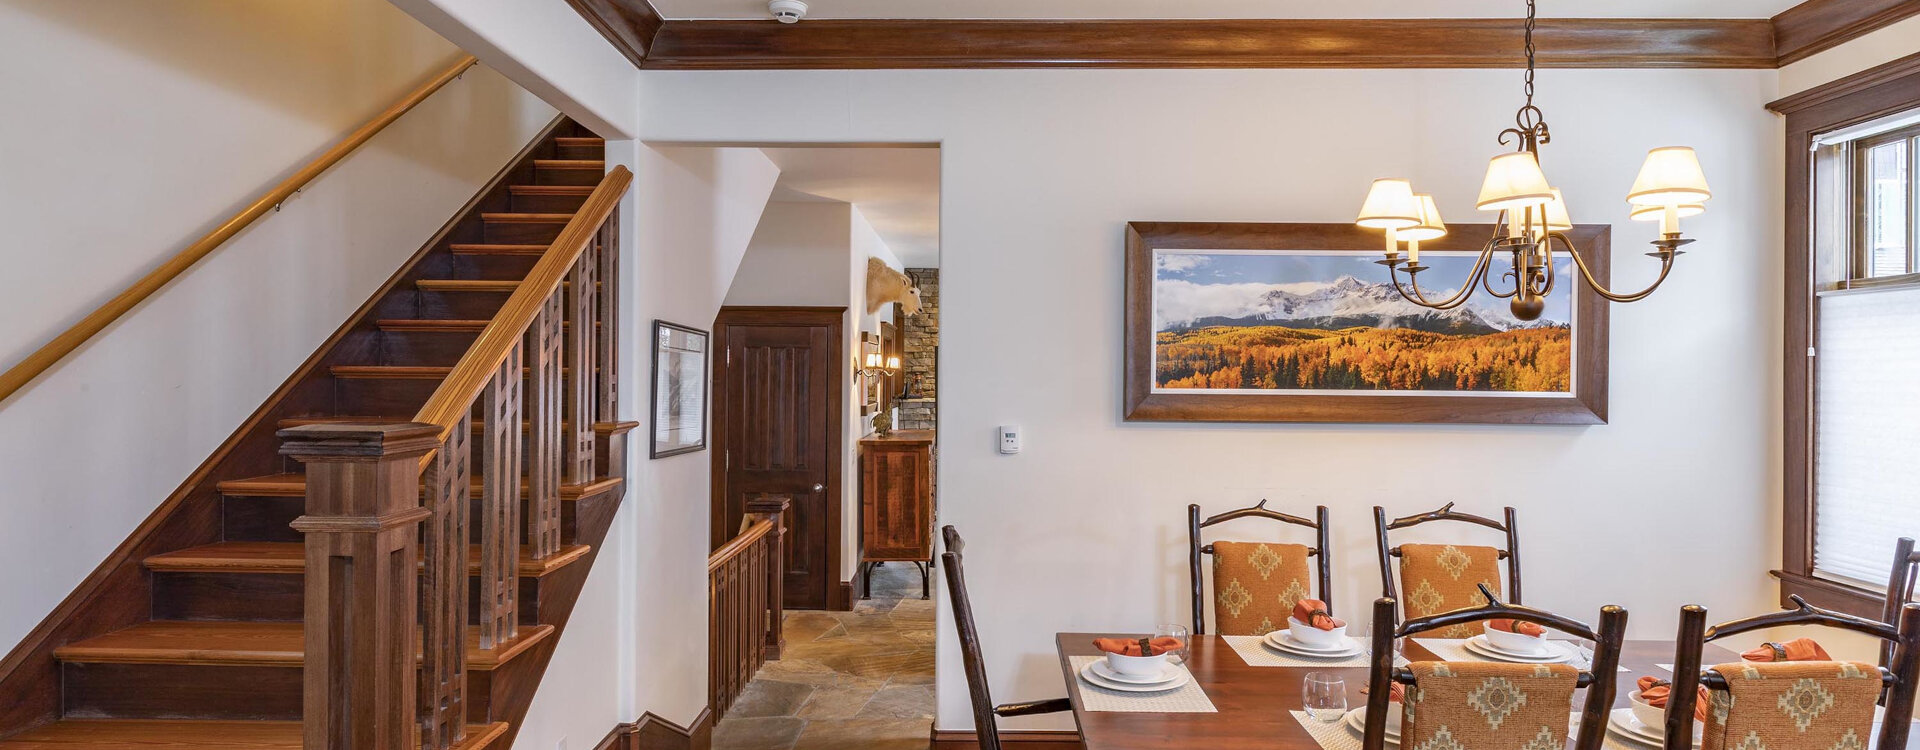 1.6-telluride-heritage-house-dining-room-stairs